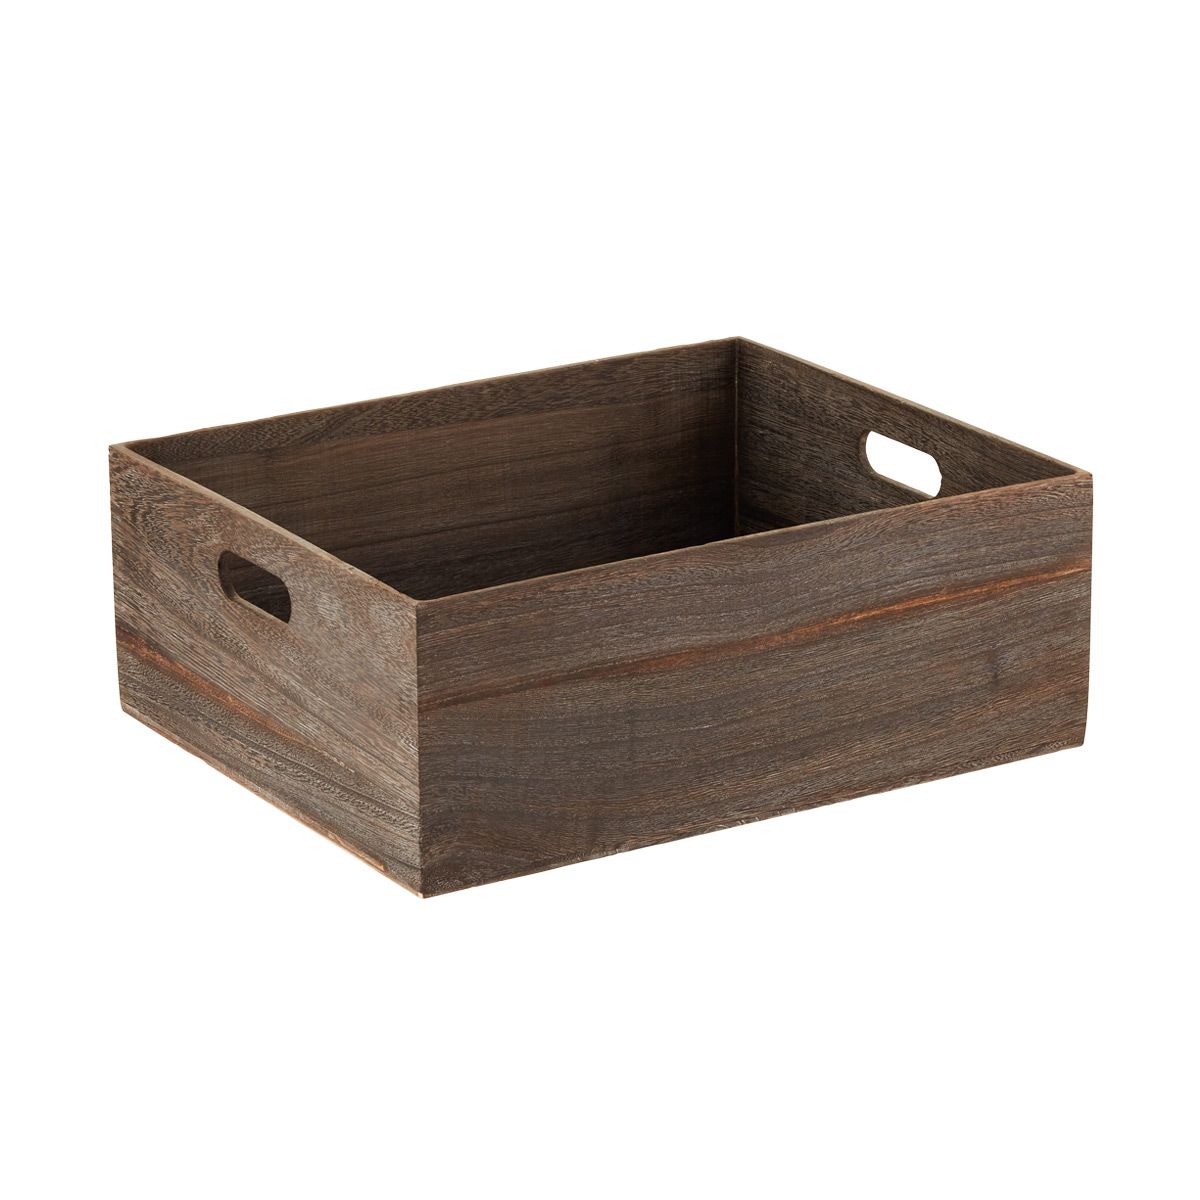 Brentwood Storage Bins | The Container Store